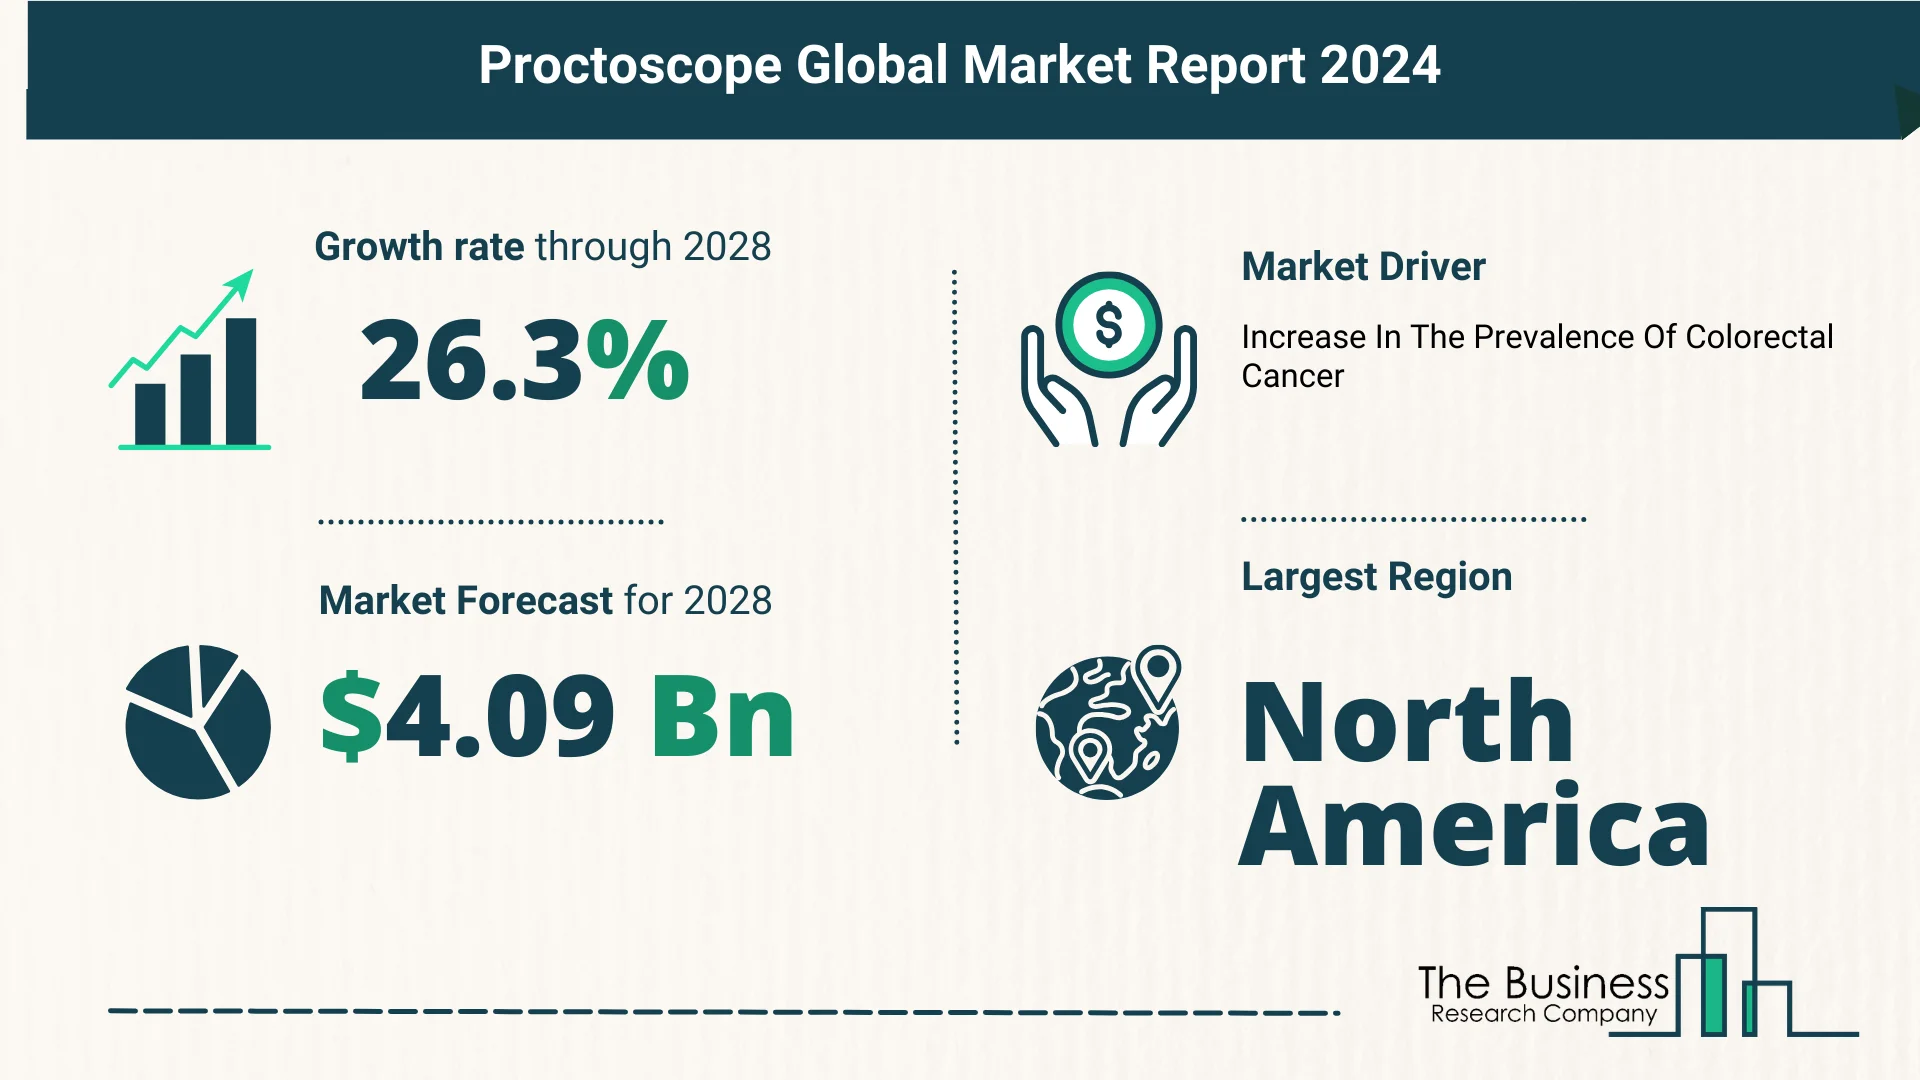 What Is The Forecast Growth Rate For The Proctoscope Market?